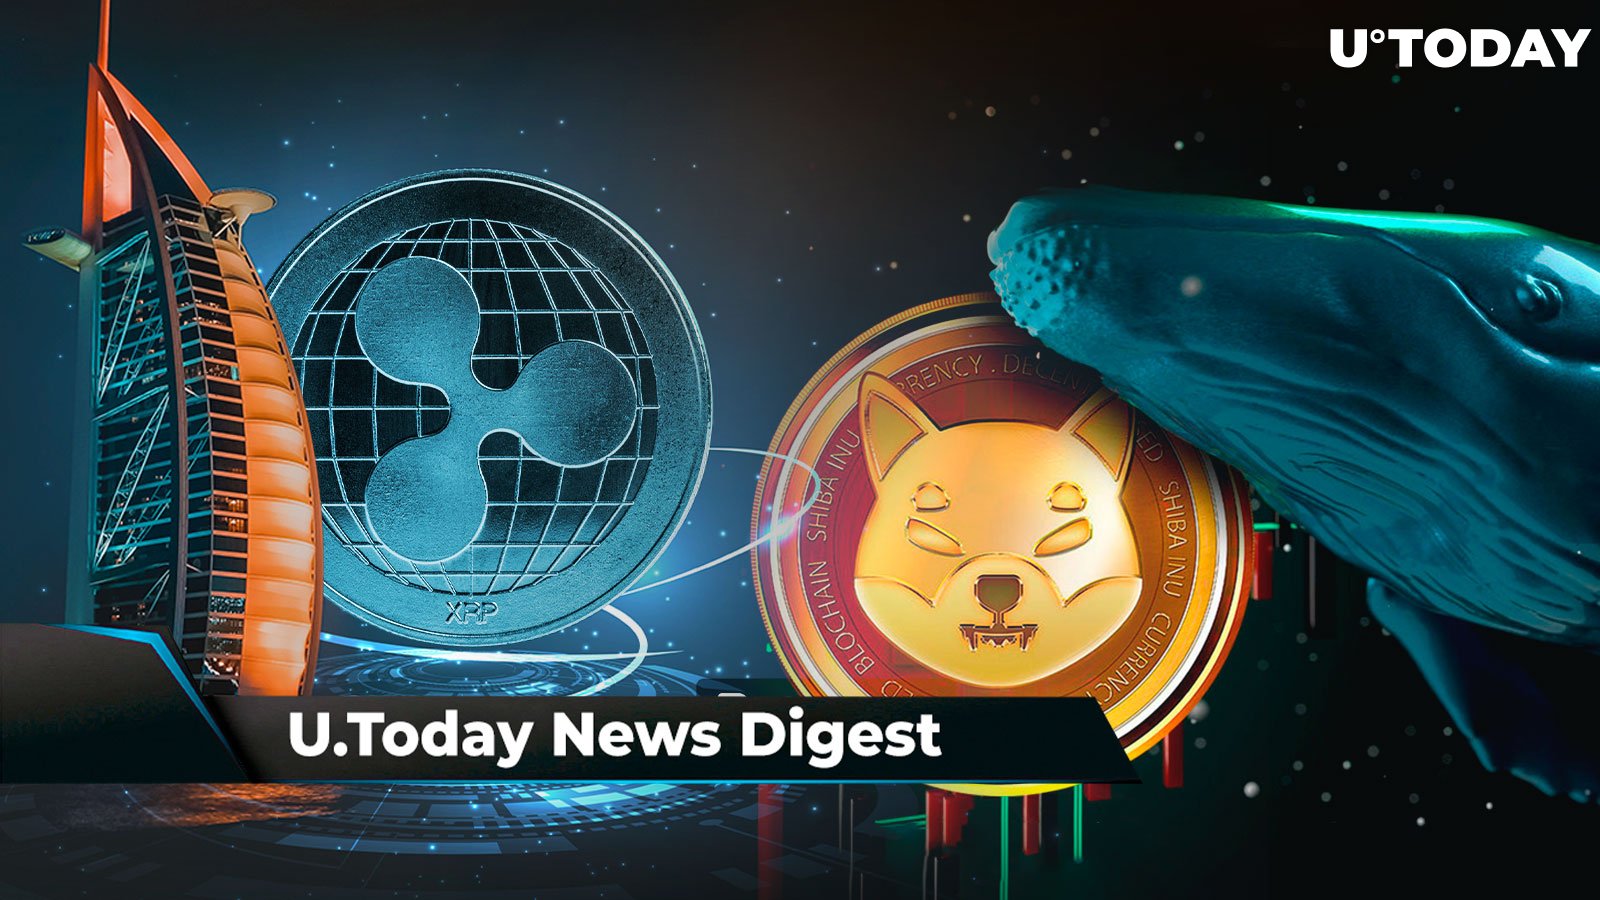 Ripple Attracting Institutional Investors in Dubai, Cramer Issues Major Bitcoin Price Warning, Mysterious SHIB Whale Buys Billions of SHIB: Crypto News Digest by U.Today